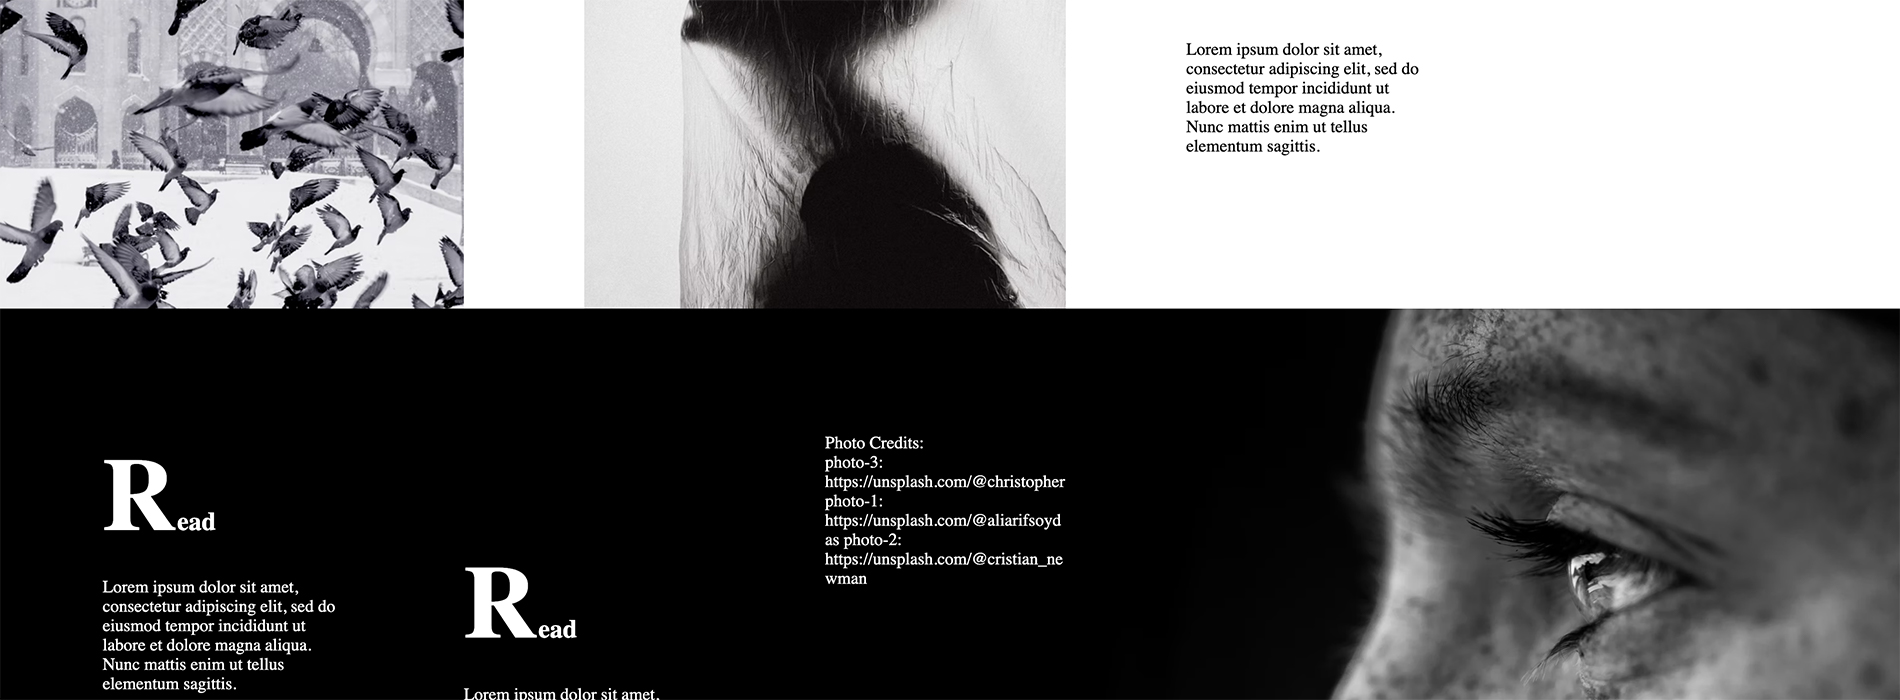 black and white web page with interesting grid design and black and white images